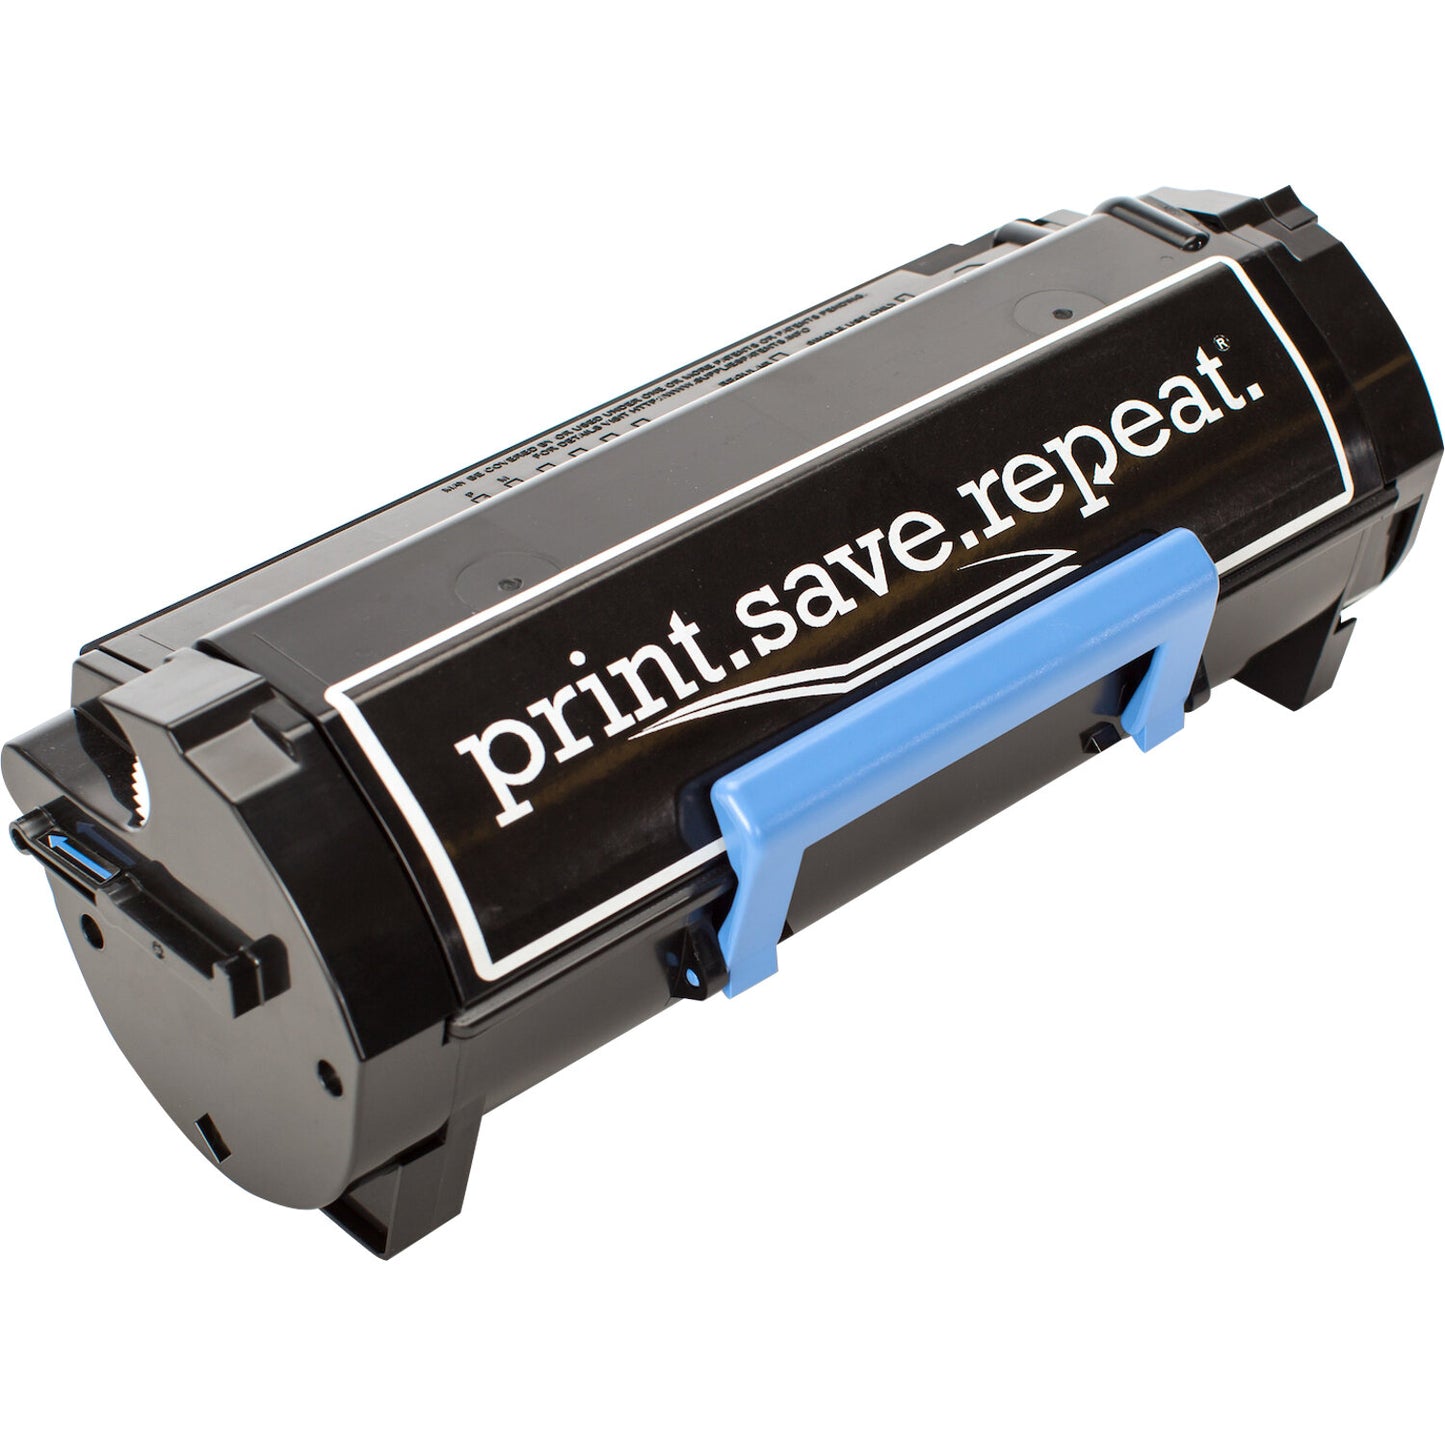 Print.Save.Repeat. Dell GGCTW High Yield Remanufactured Toner Cartridge for S2830 [8,500 Pages]